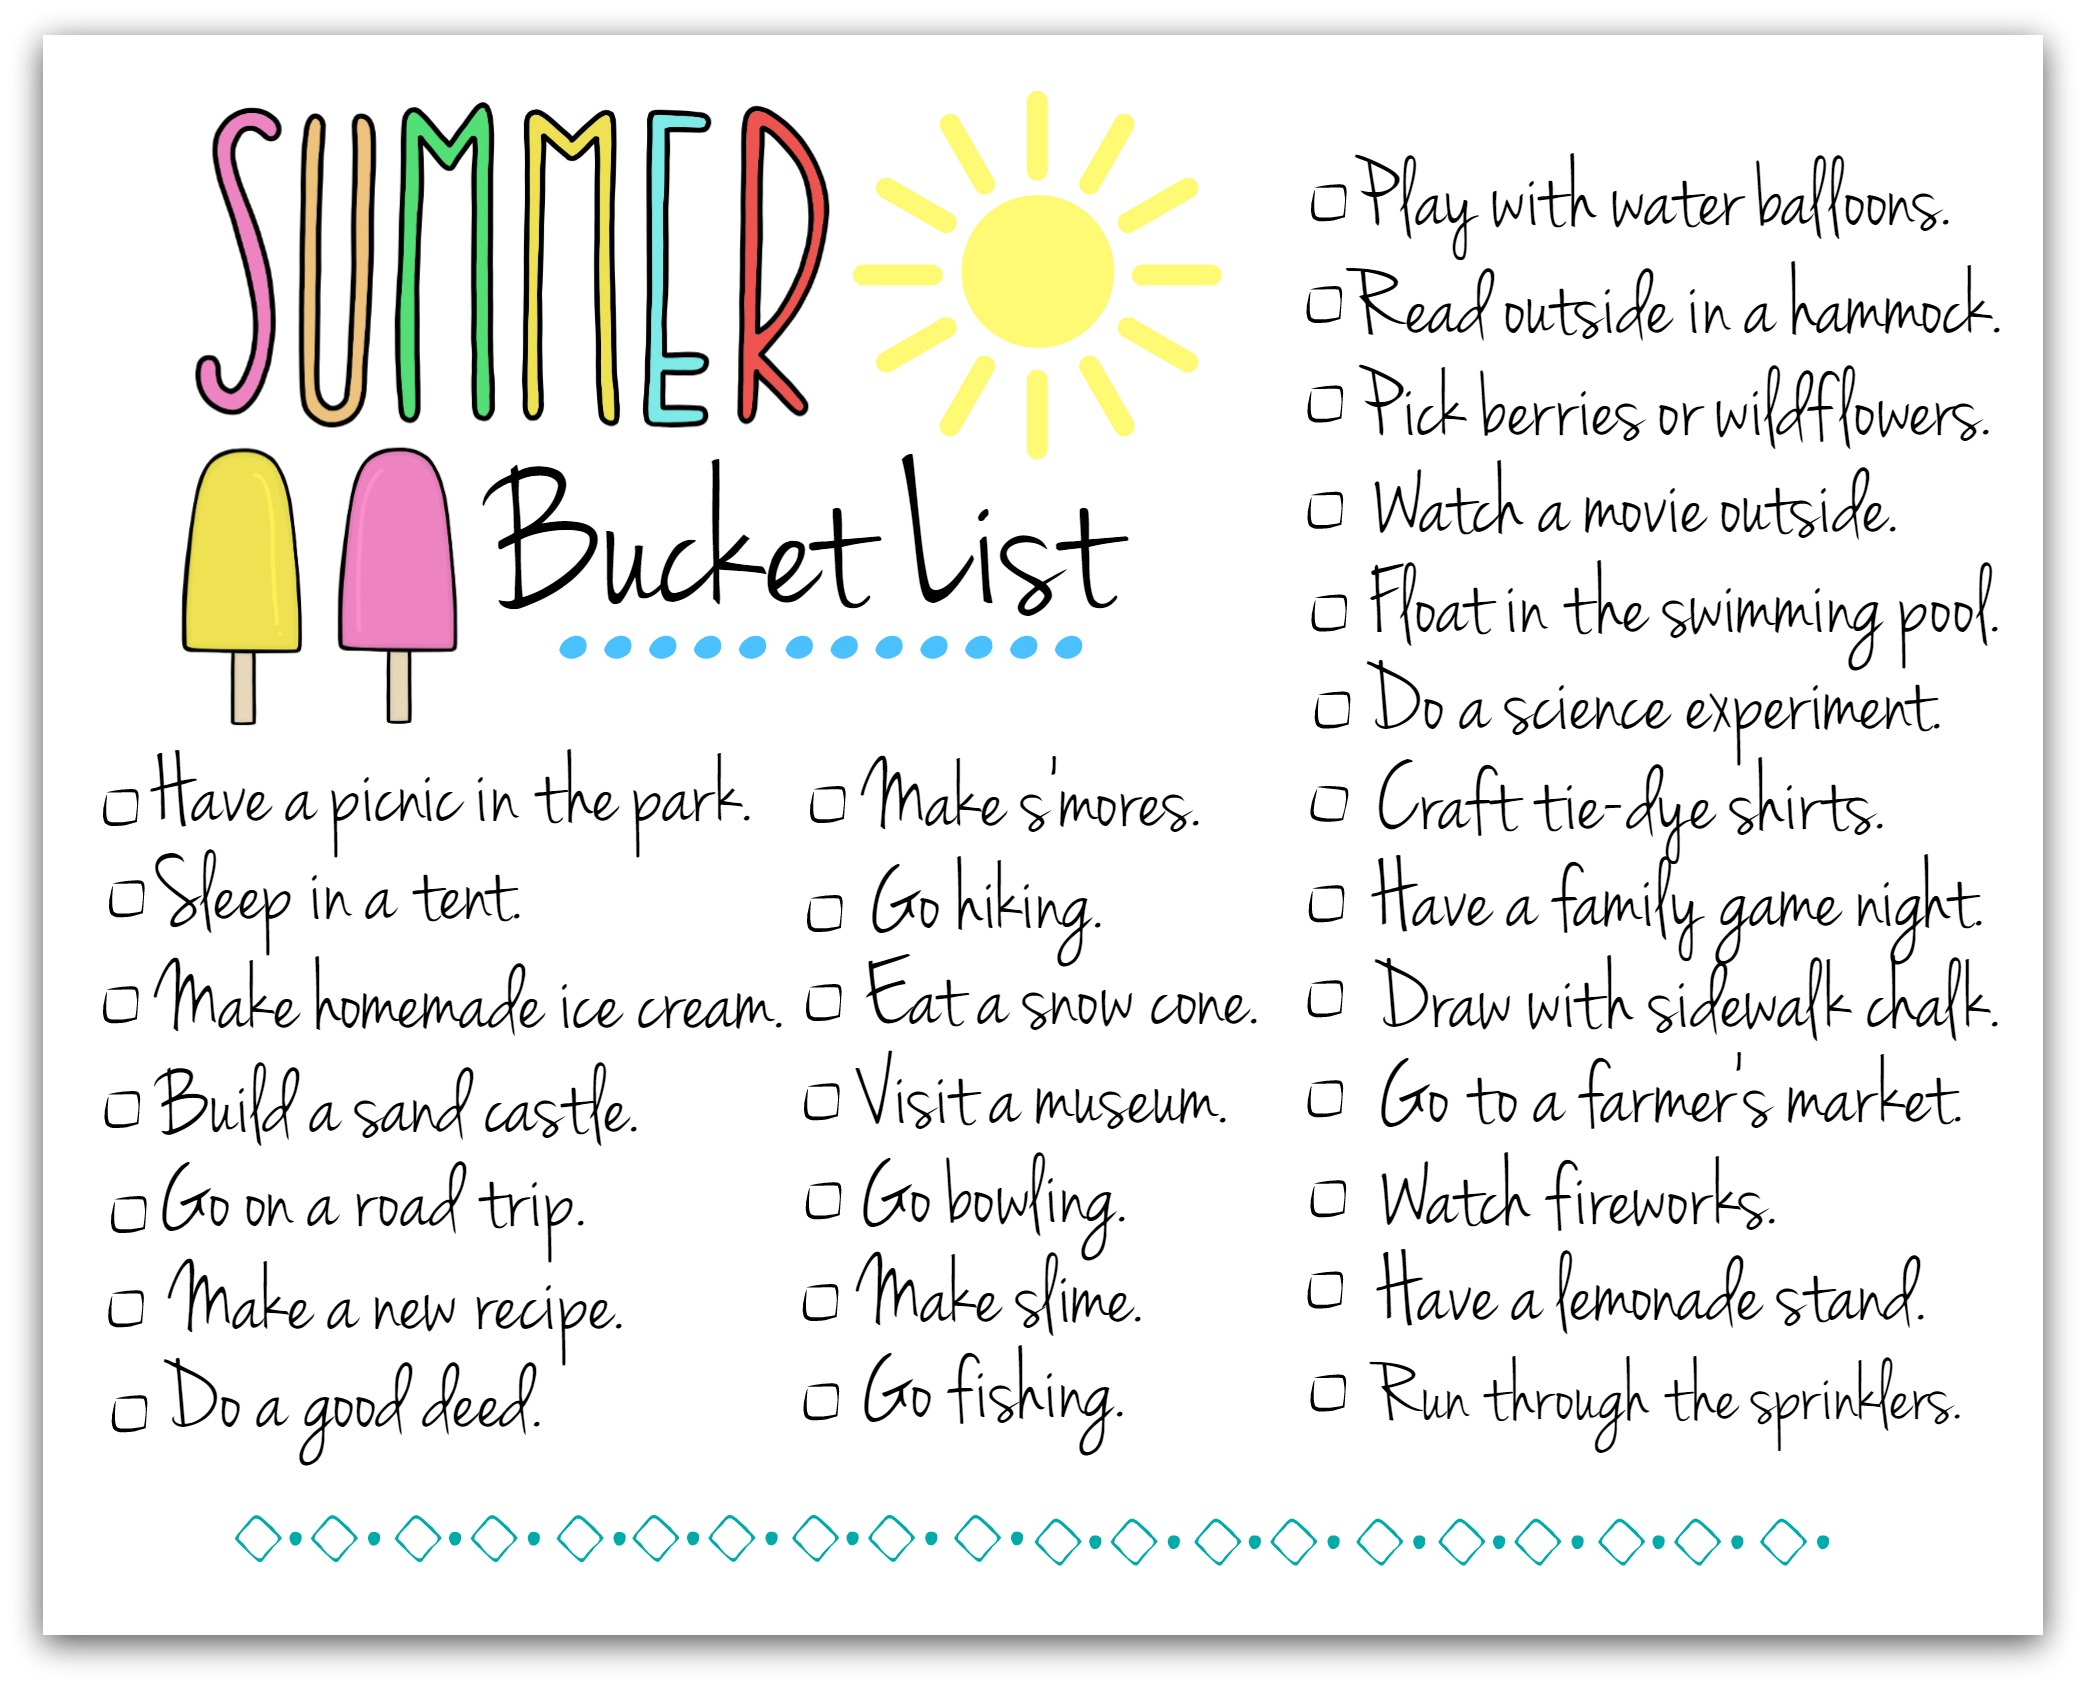 Print Our Summer Bucket List For Fun Activity Ideas Its Free